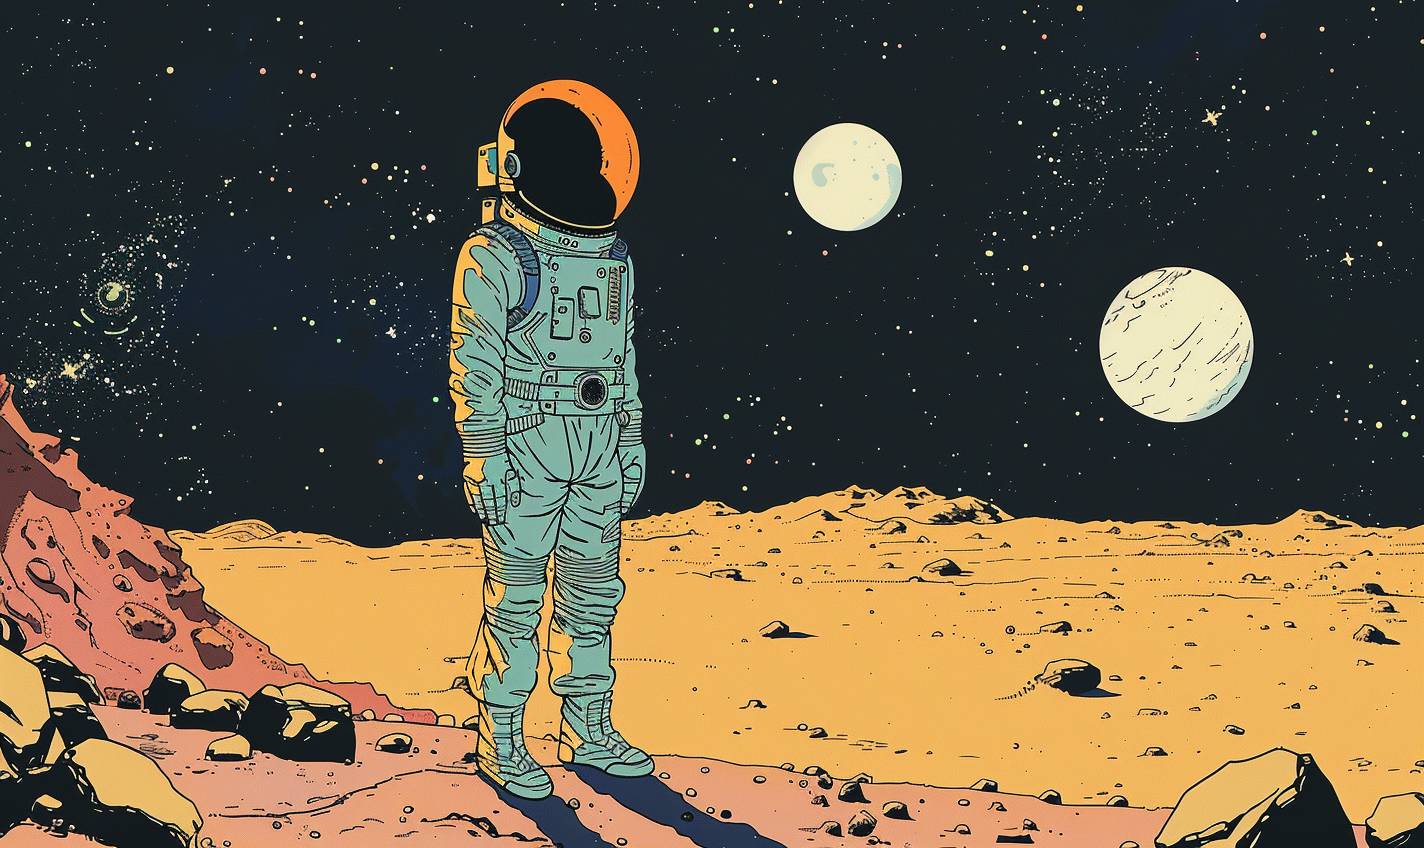 In the style of Adrian Tomine, a space explorer discovers a new galaxy